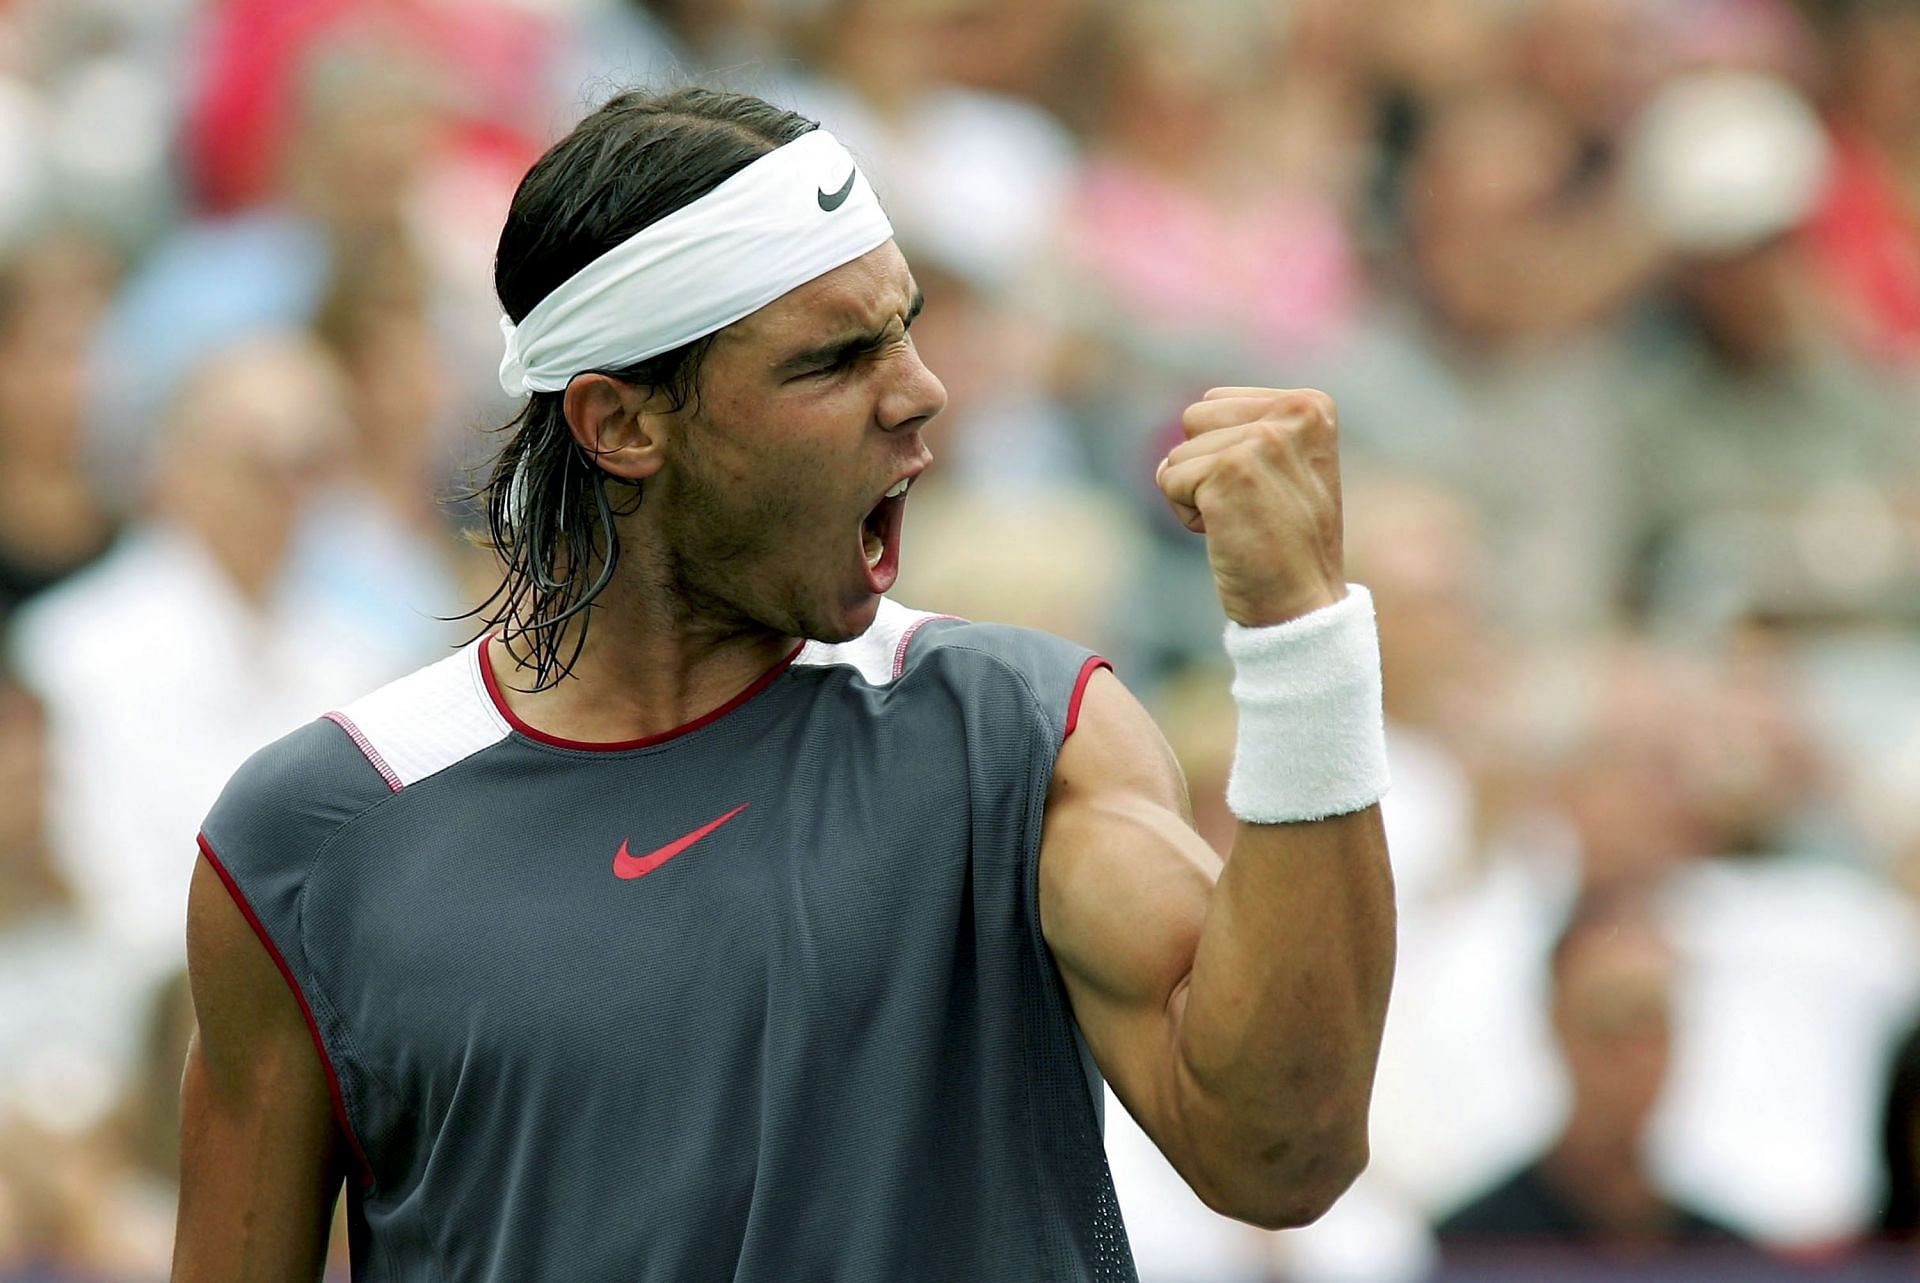 Rafael Nadal ended up winning four Masters 1000 titles in a prolific 2005 season